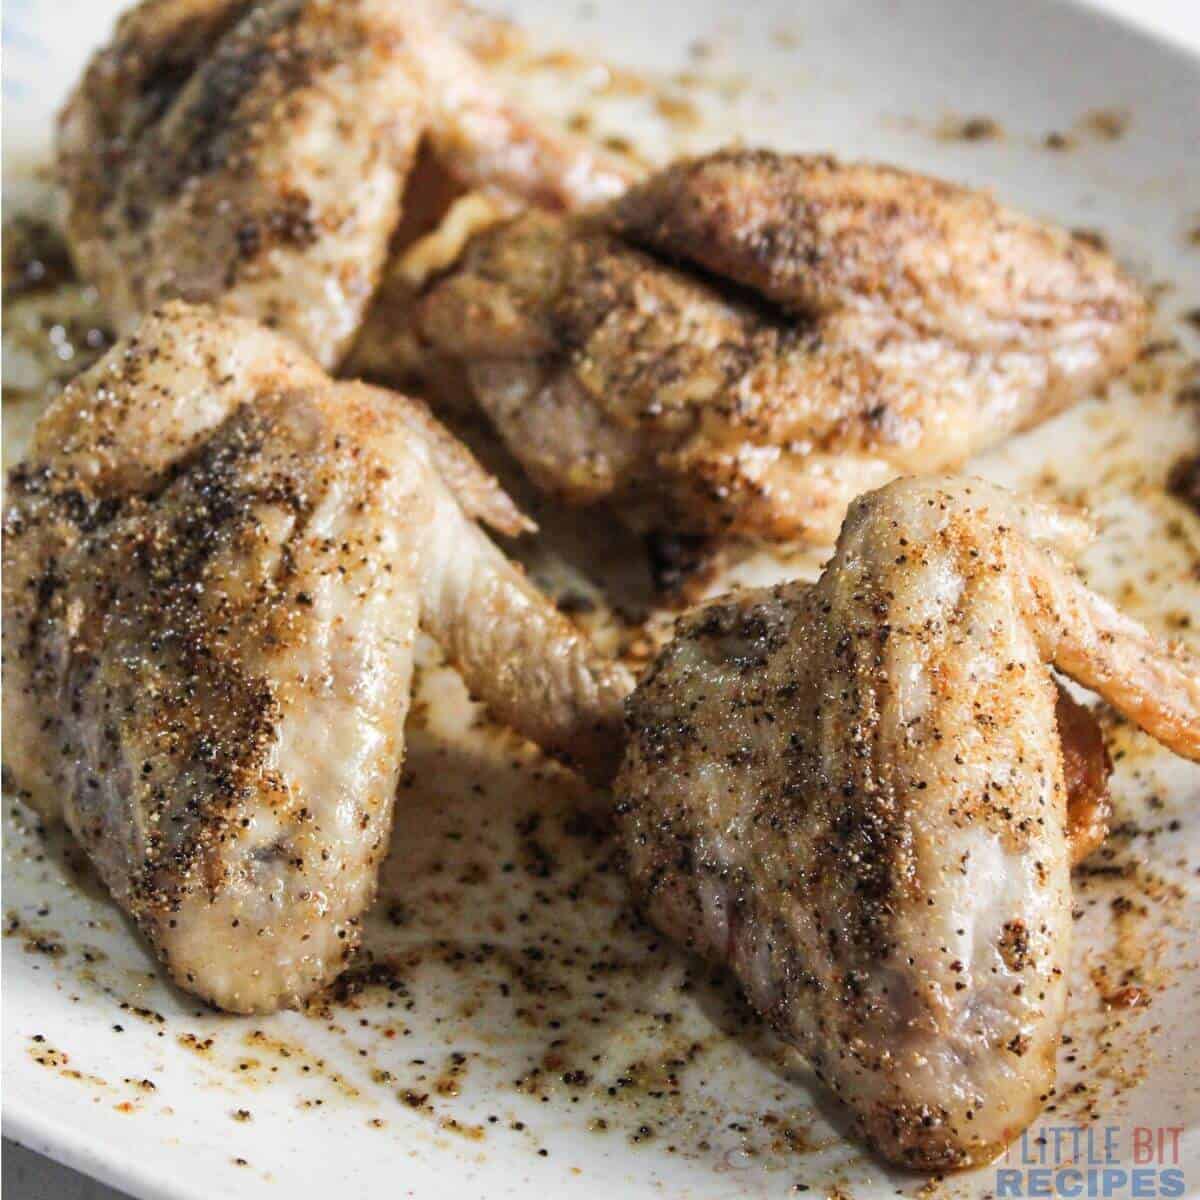 seasoned partially cooked chicken wings.